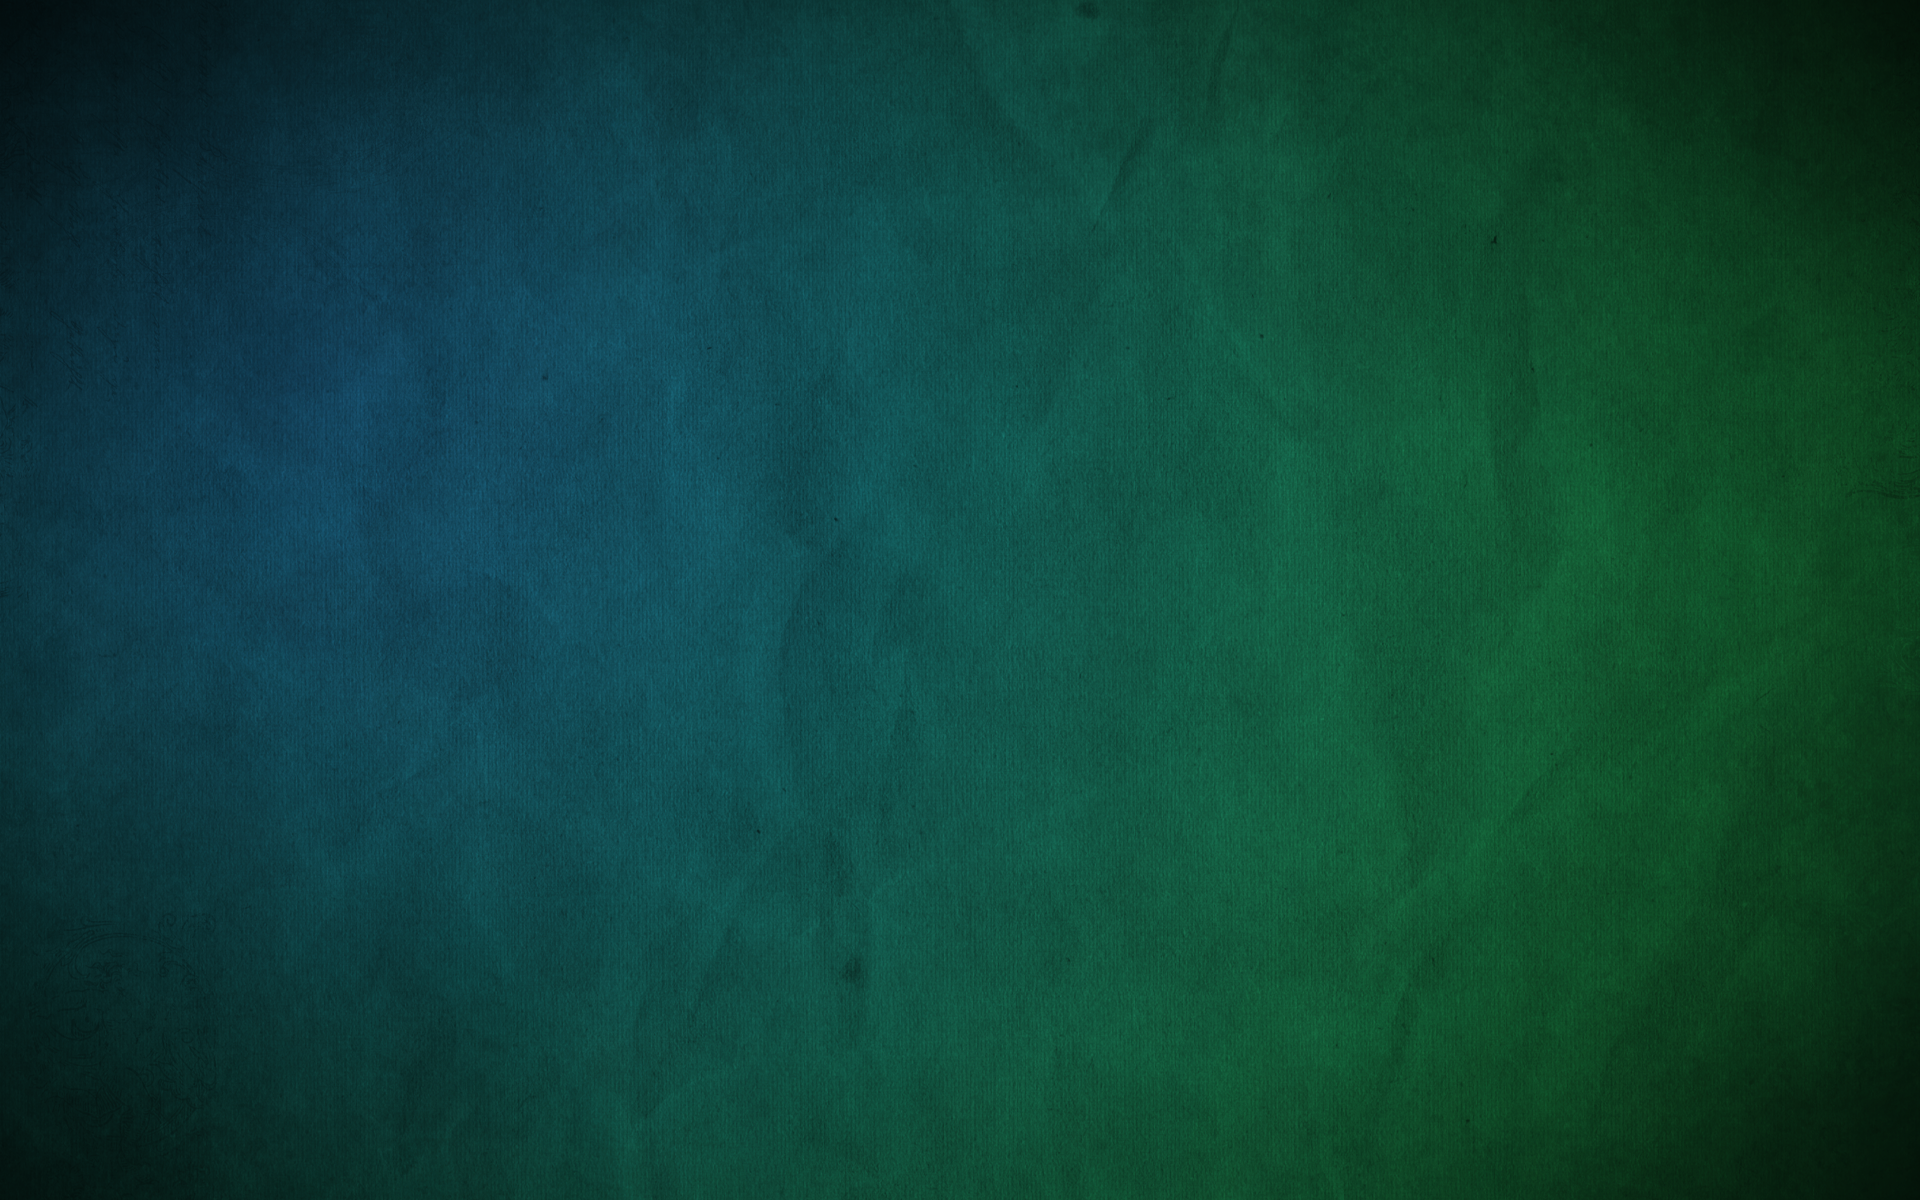 green, Abstract, Paper, Multicolor, Wall, Grunge, Textures, Backgrounds Wallpaper